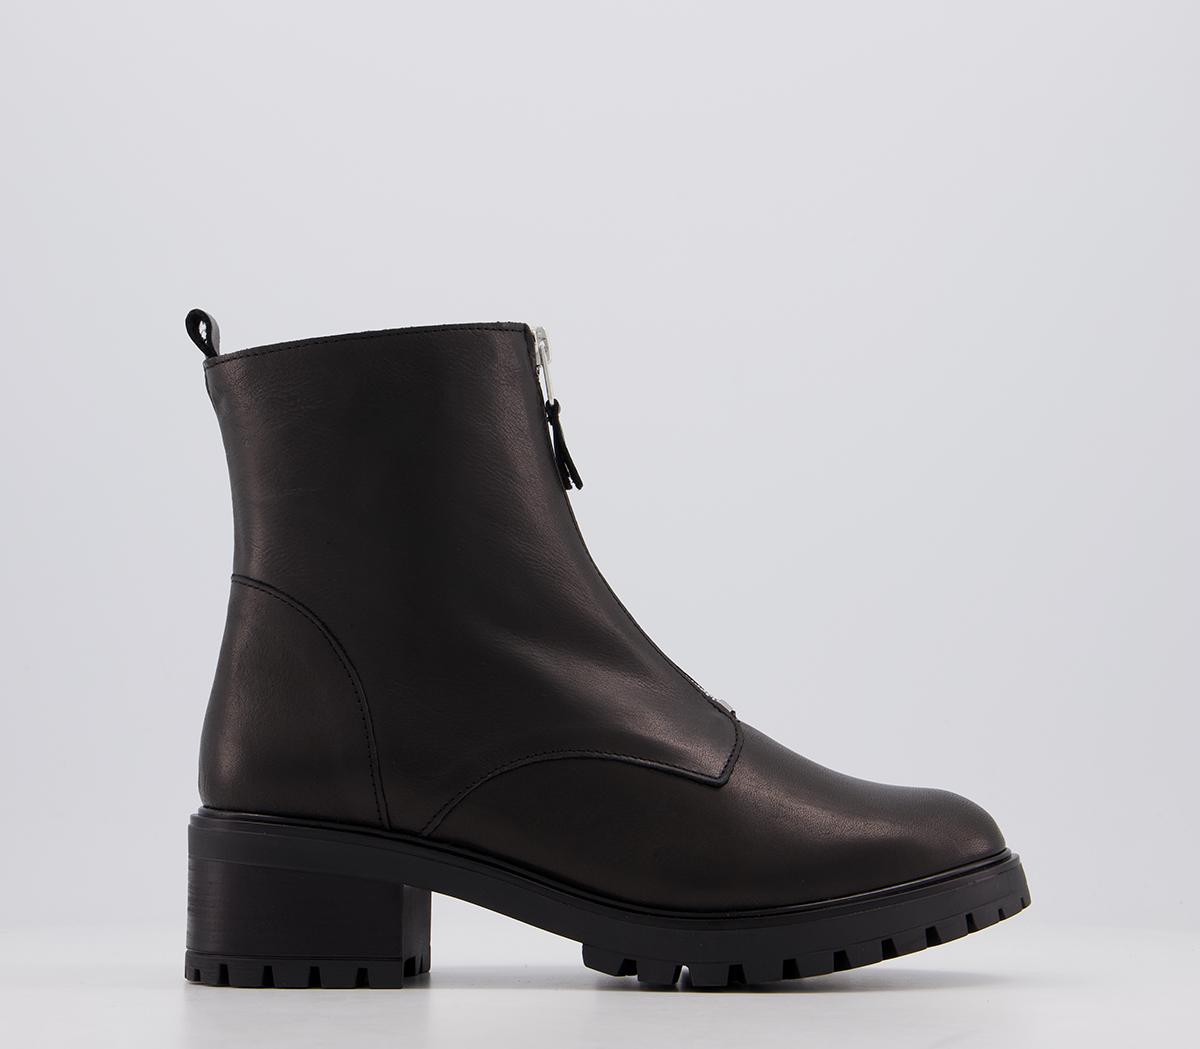 OFFICEAngelic Front Zip Casual Ankle BootsBlack Leather